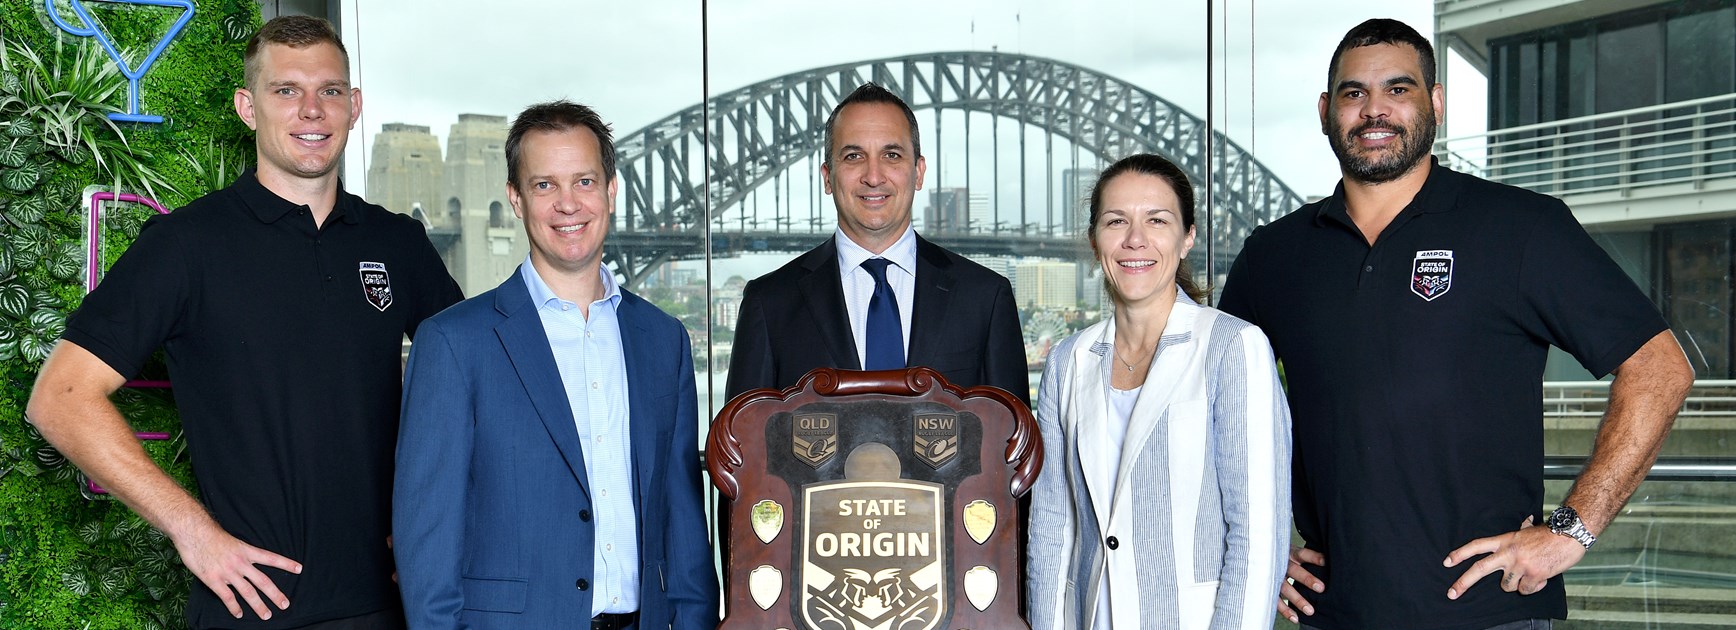 Ampol secures State of Origin naming rights